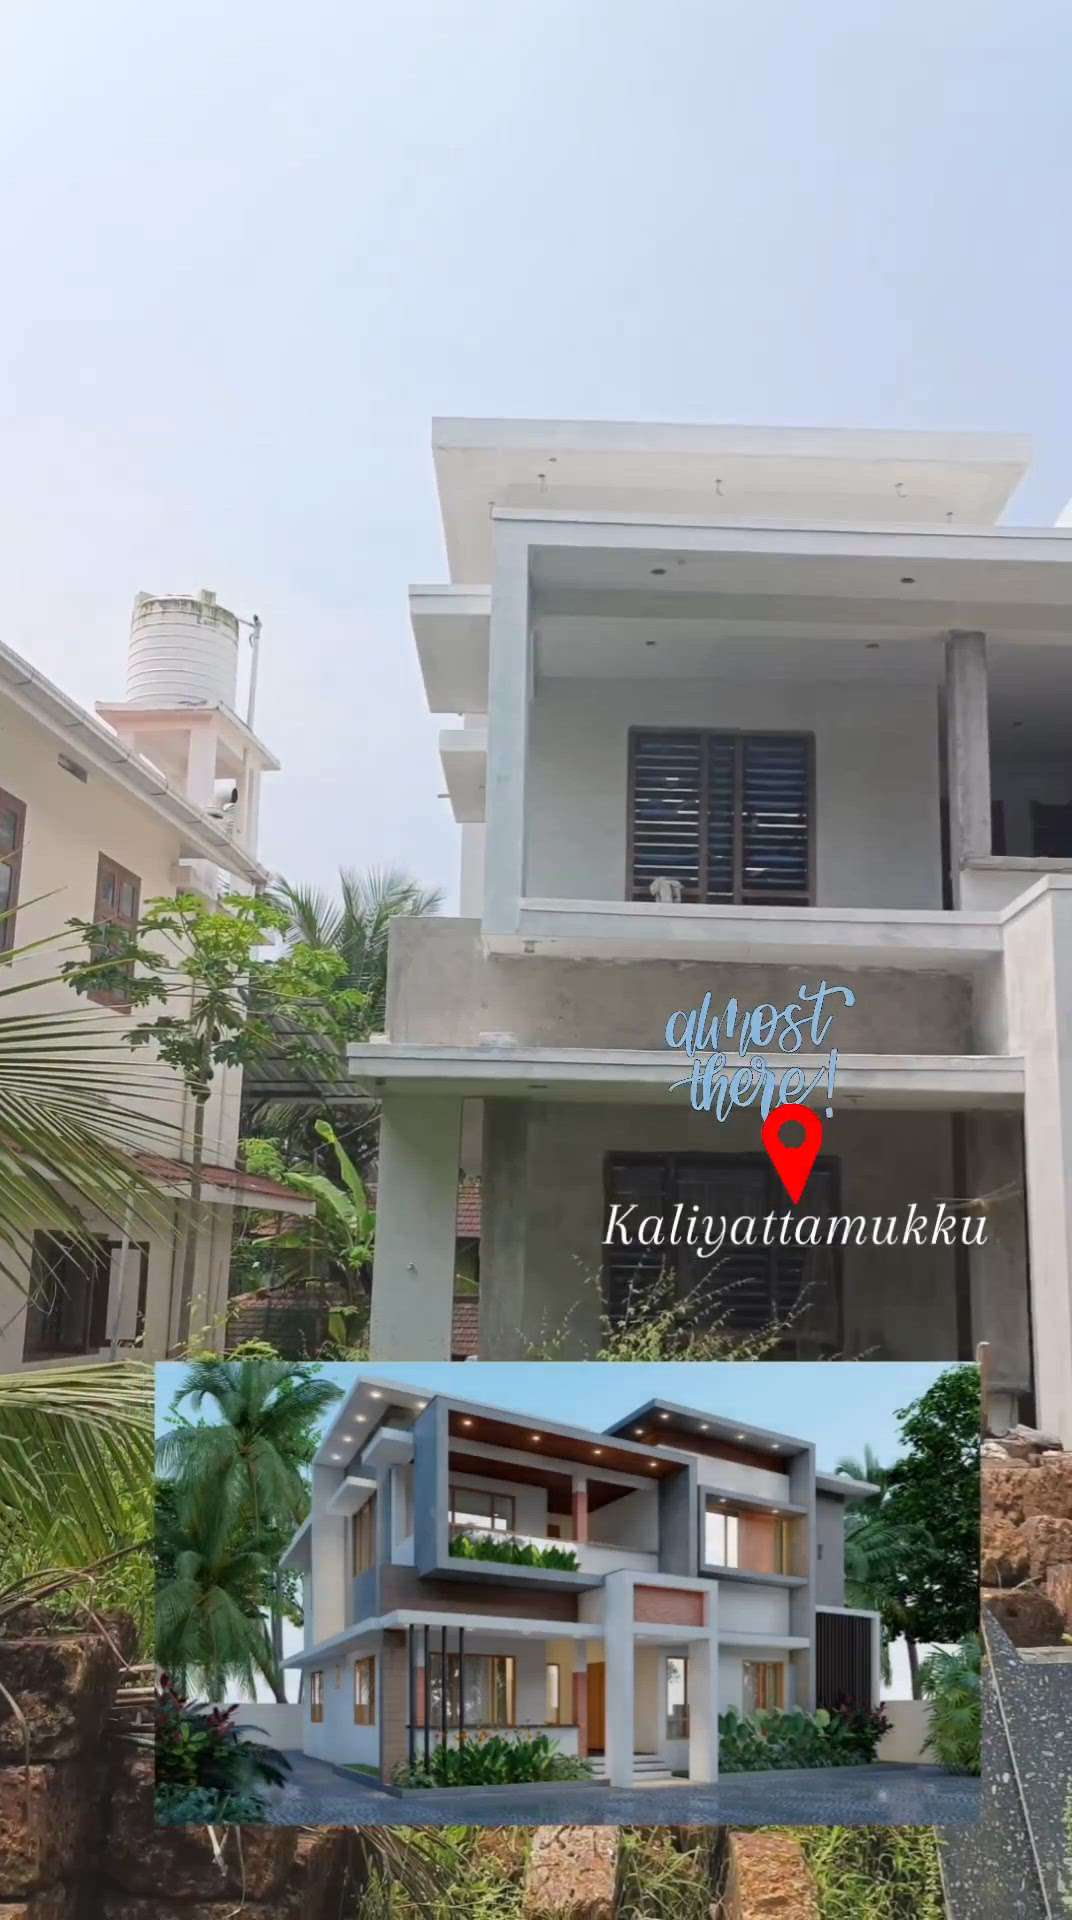 Successful completed another work for Mr.Kabeer Kaliyattamukku

Plan includes:
4 beds with attached toilet
Dining
Living
Sitout
Kitchen 
Store
Work area
Balcony
Hall



#housedesign #homedesign #traditional #kerala #keralahouse  #contemporary #contemporarydrawing #contemporaryhomes #contemporaryhouse #contemporaryhomedesign 
 #architecture #architecturelovers #architecturedesign #archi #keralahousedesign #3dhomedesign #house #housedesign #traditional #traditionalhouse #trading #traditionalhousedesingkerala #keralatraditional #keralaplan #plan #3bhkhouse 
 #keralahousedesign #kerala #housedesignideas #Malappuram